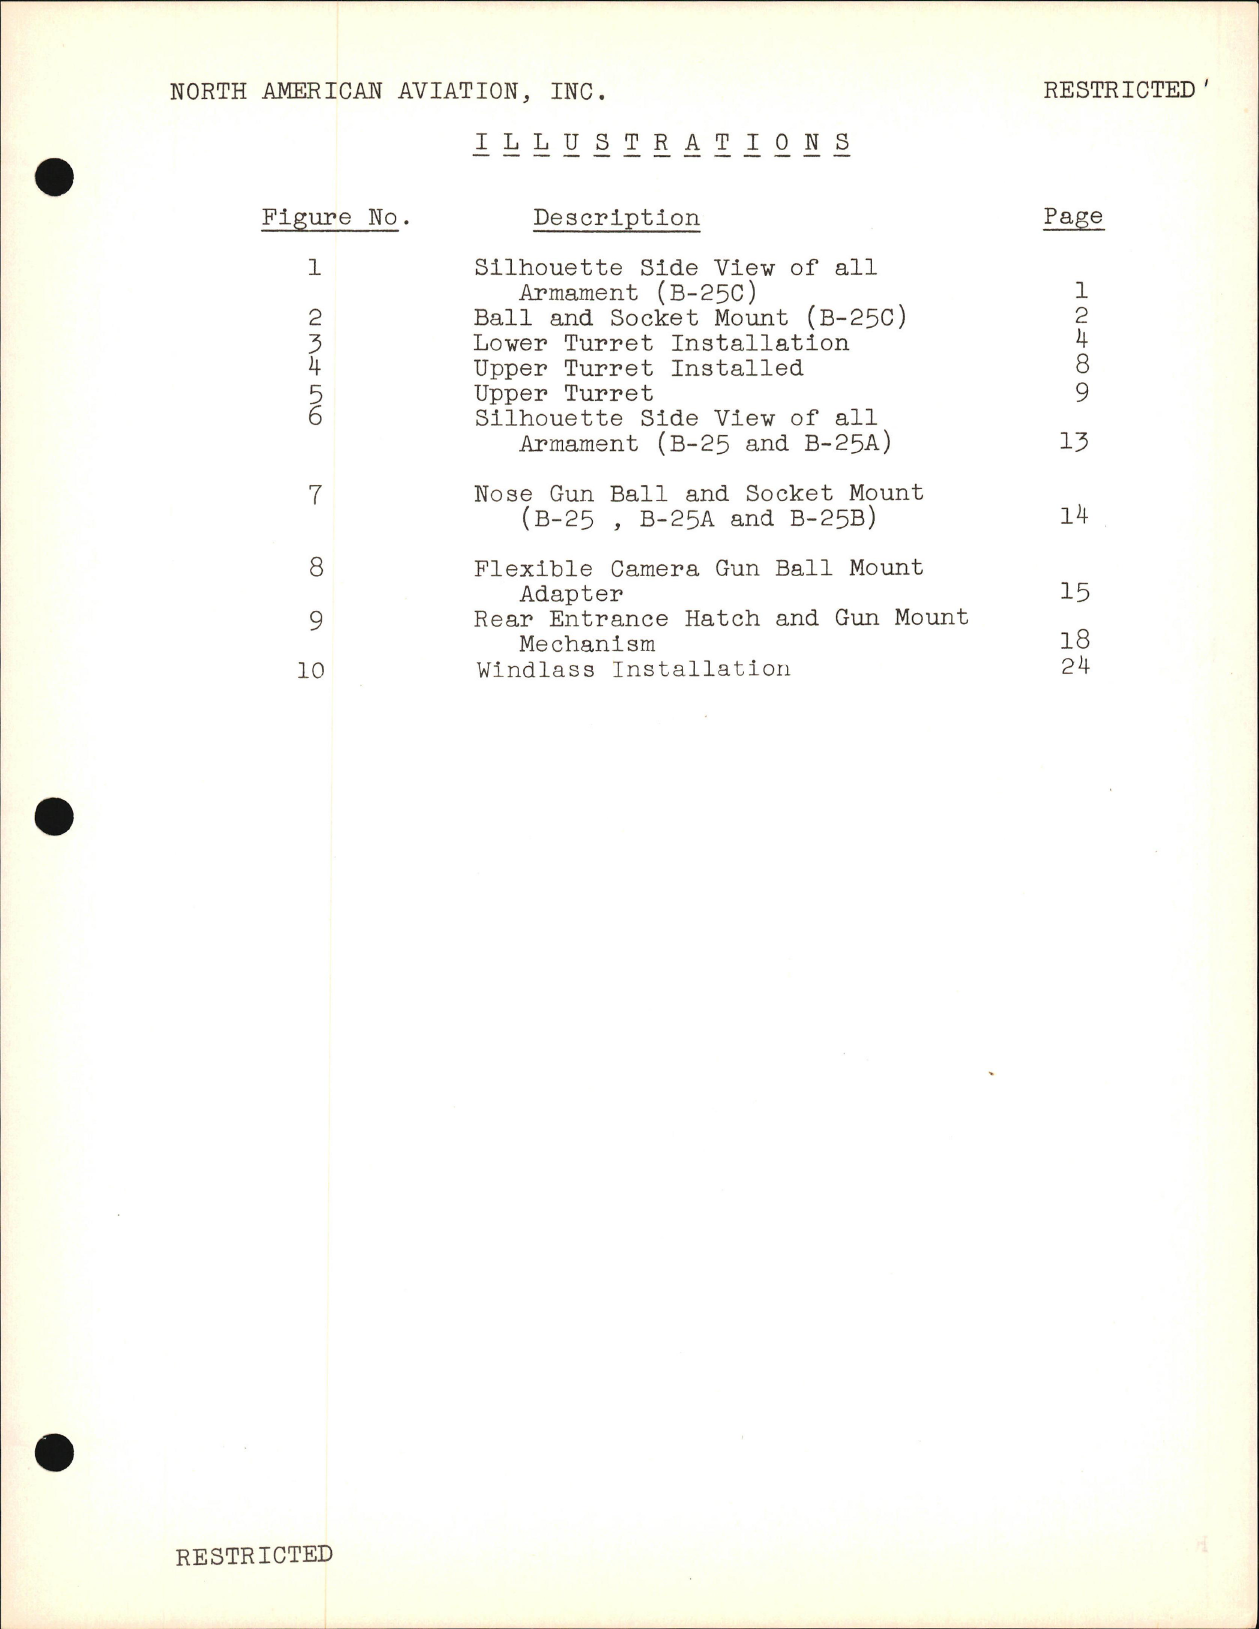 Sample page 5 from AirCorps Library document: Service School Lectures - Gun Install